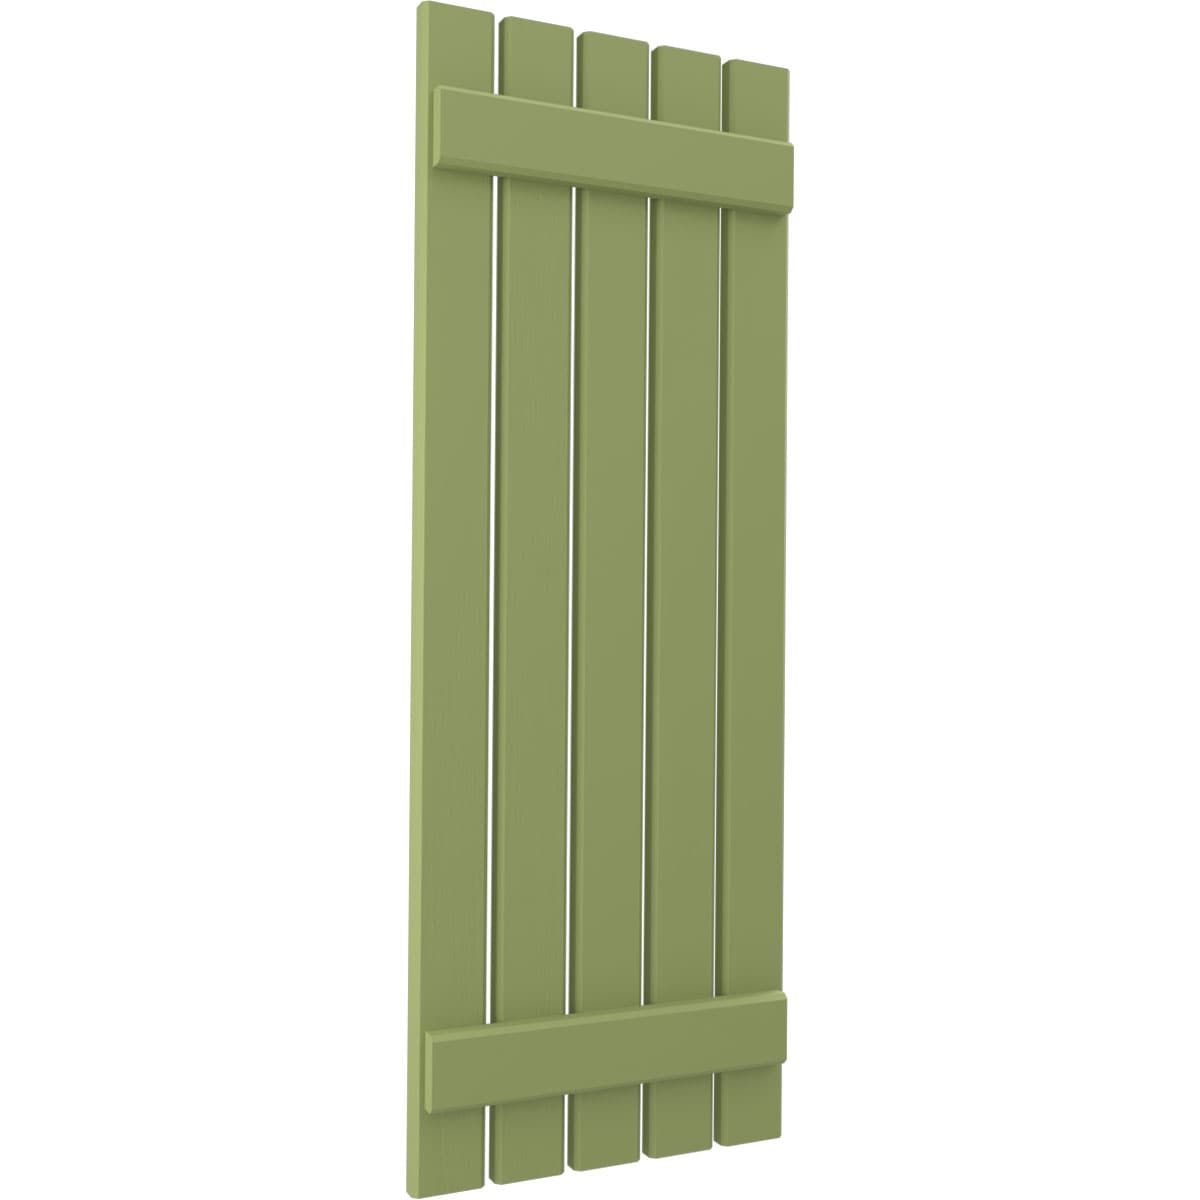 Ekena Millwork 19.5-in W x 39-in H Moss Green Paintable/Stainable 